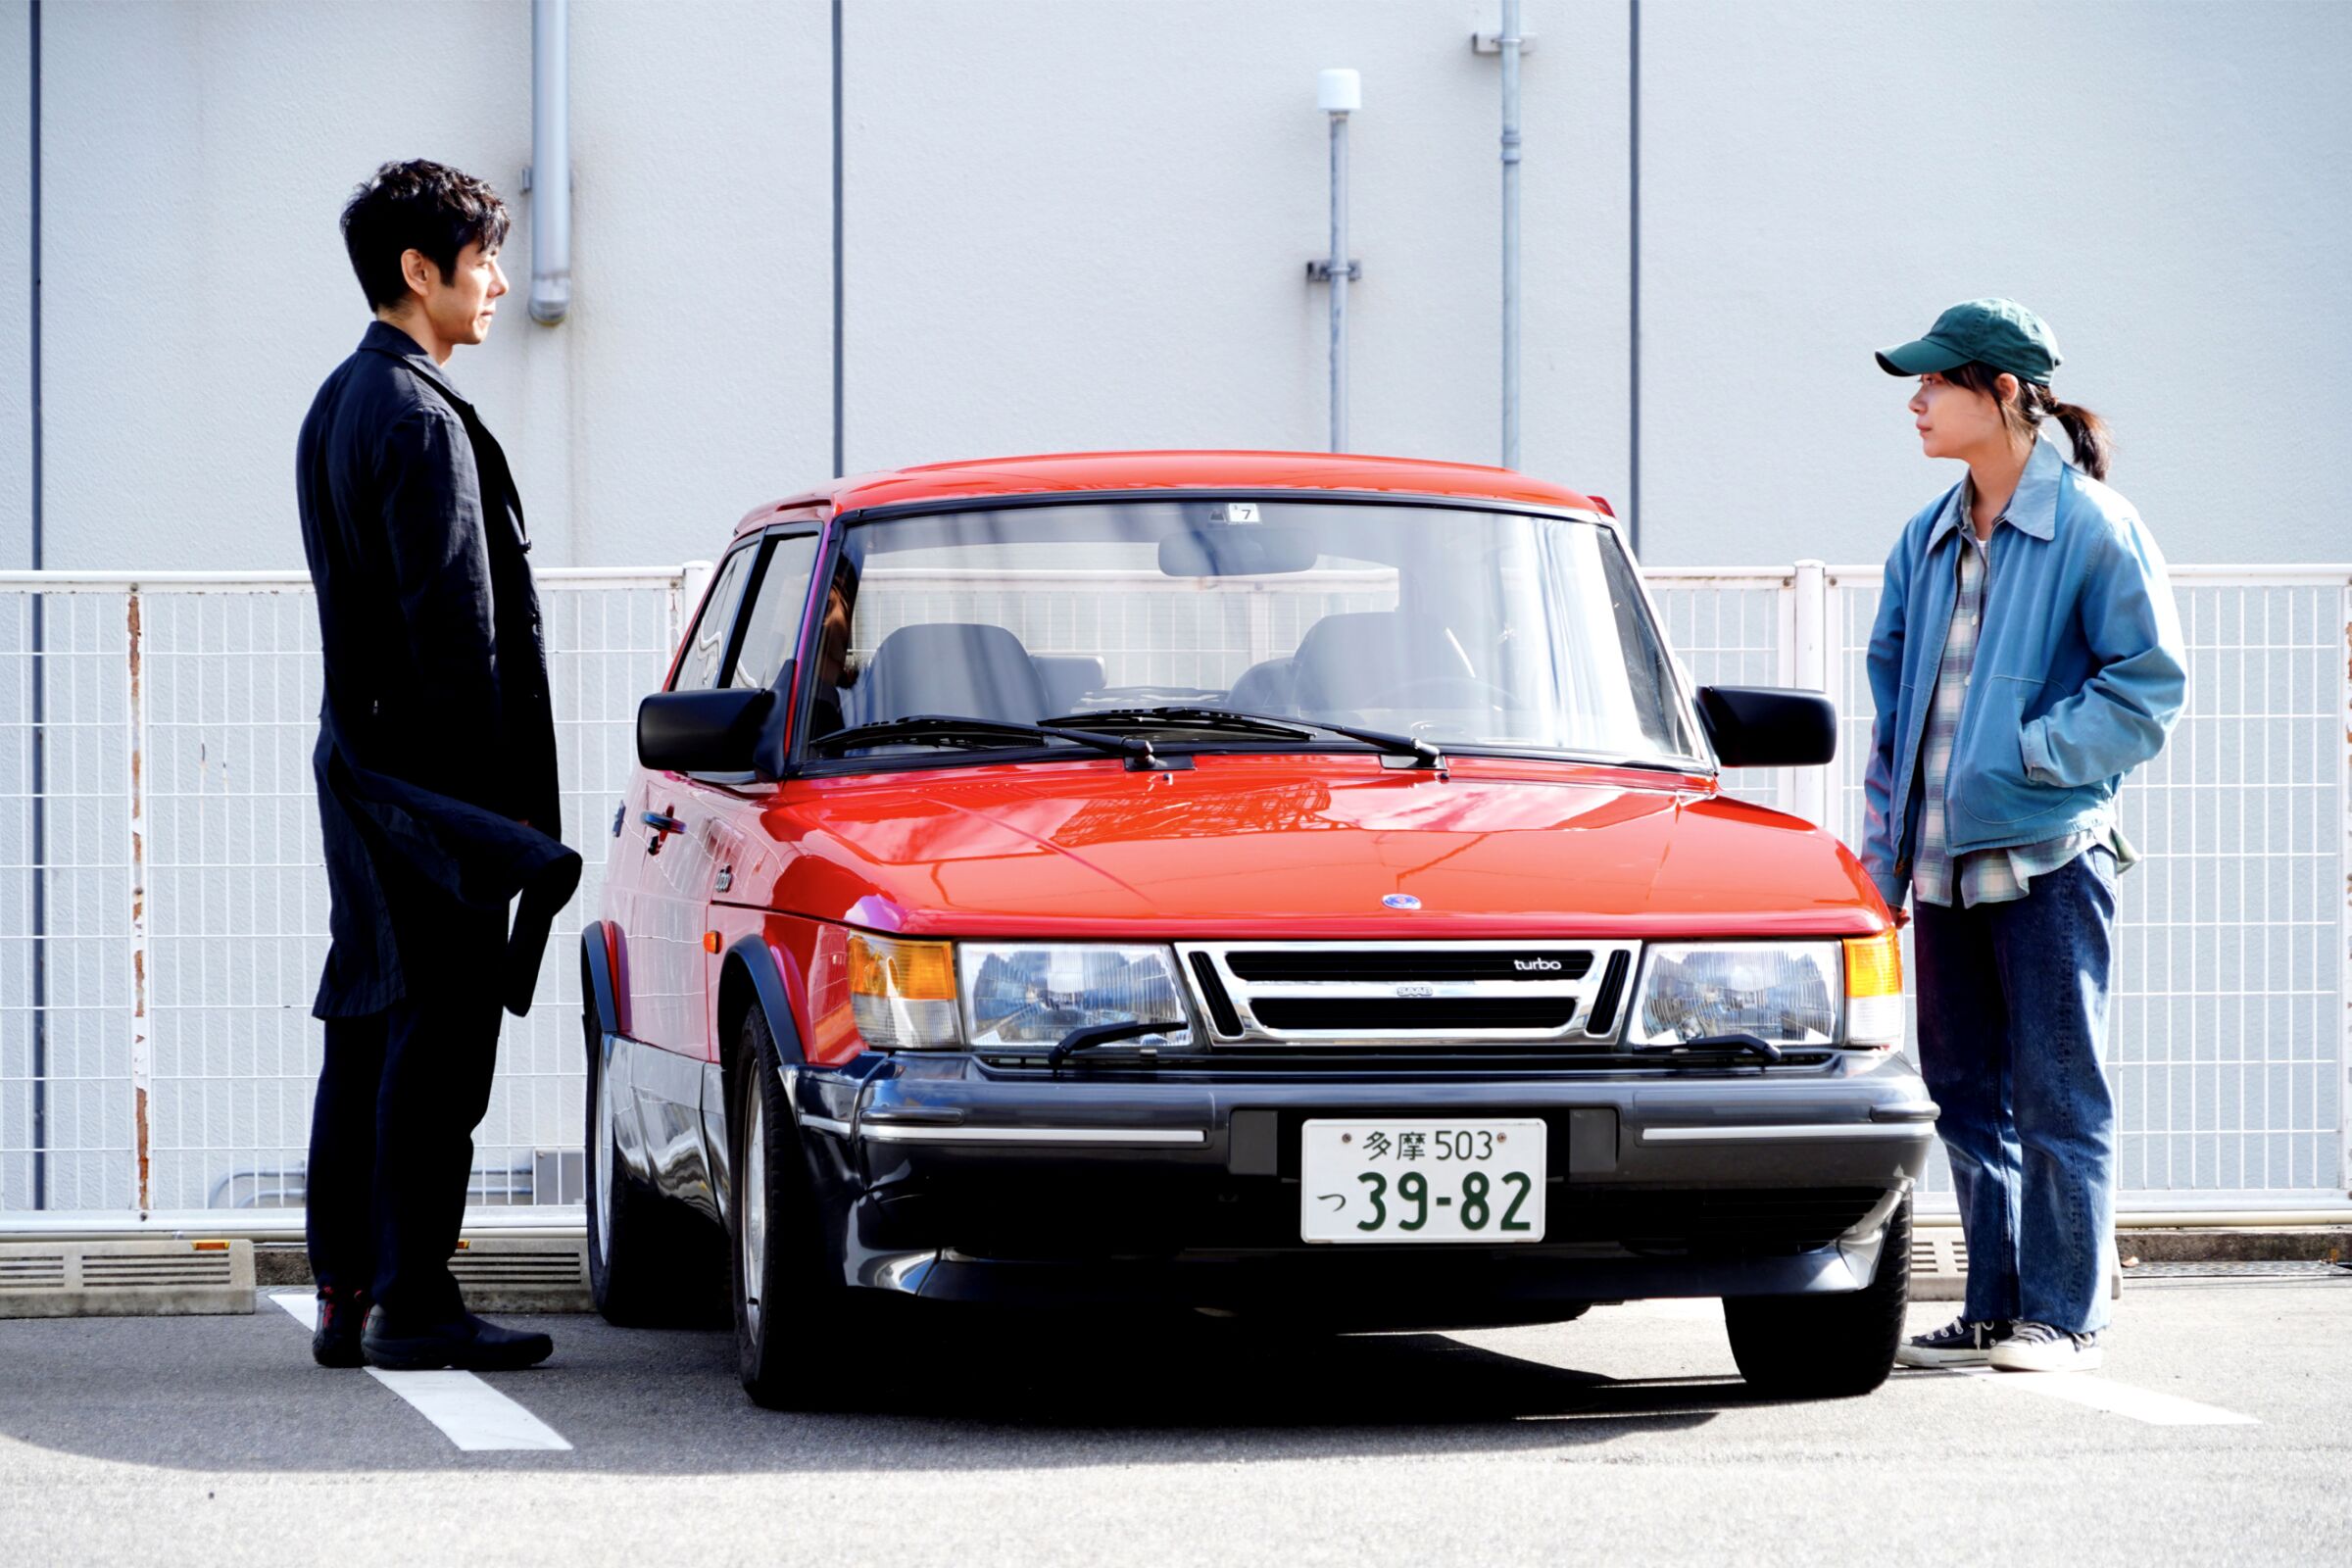 Hidetoshi Nishijima and Tôko Miura standing on opposite sides of a red car